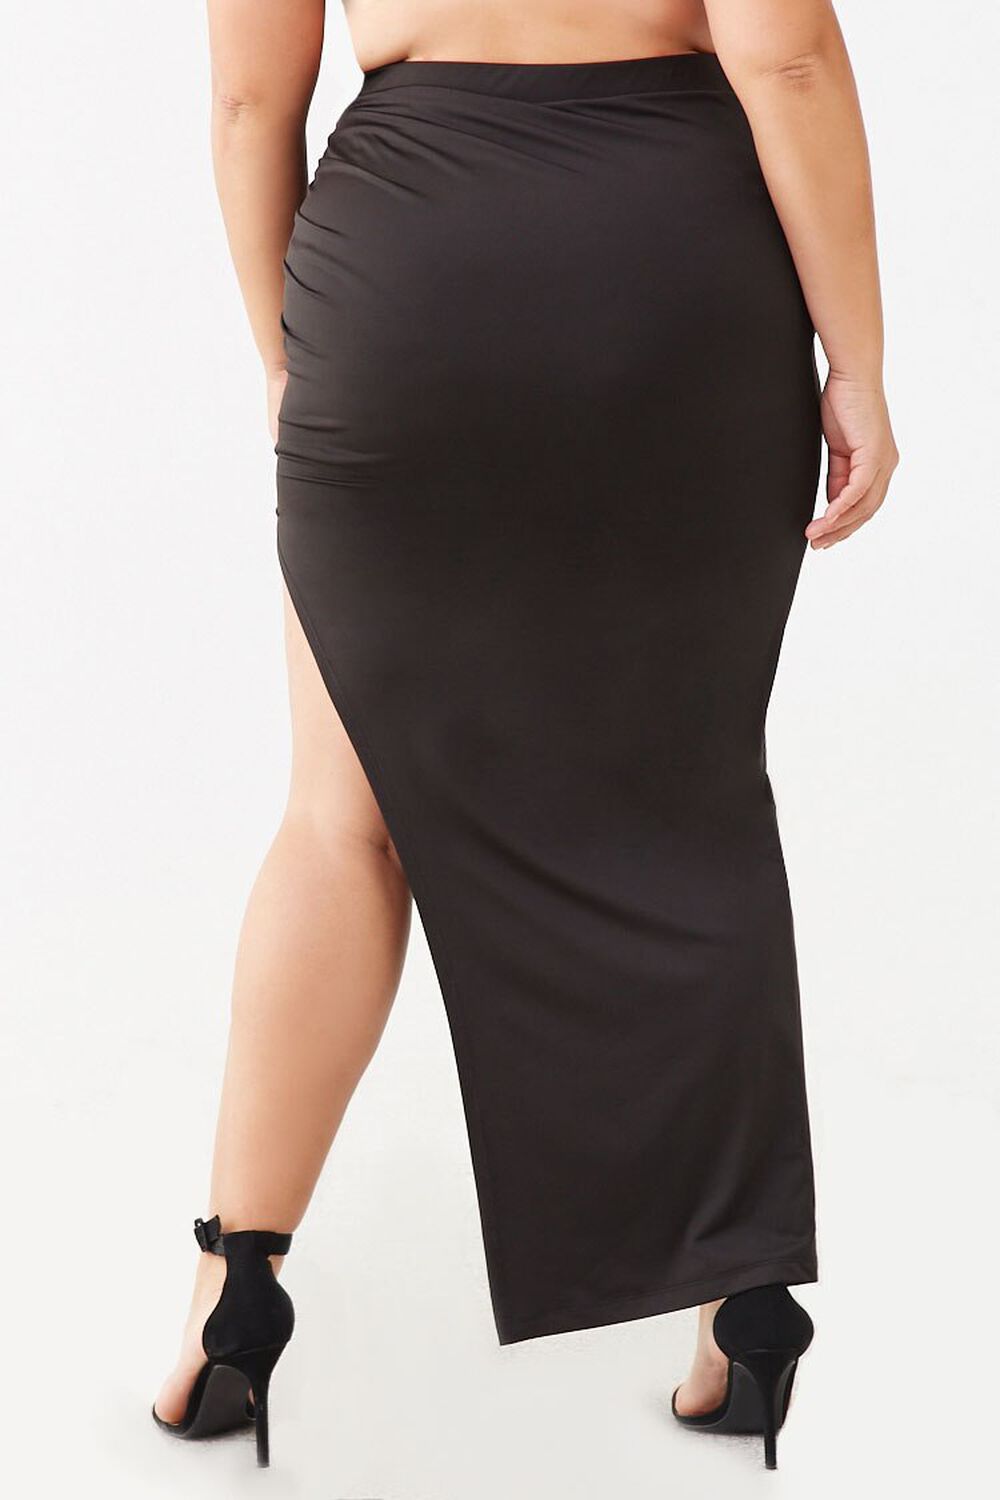 Plus Size Ruched Maxi Skirt, image 3